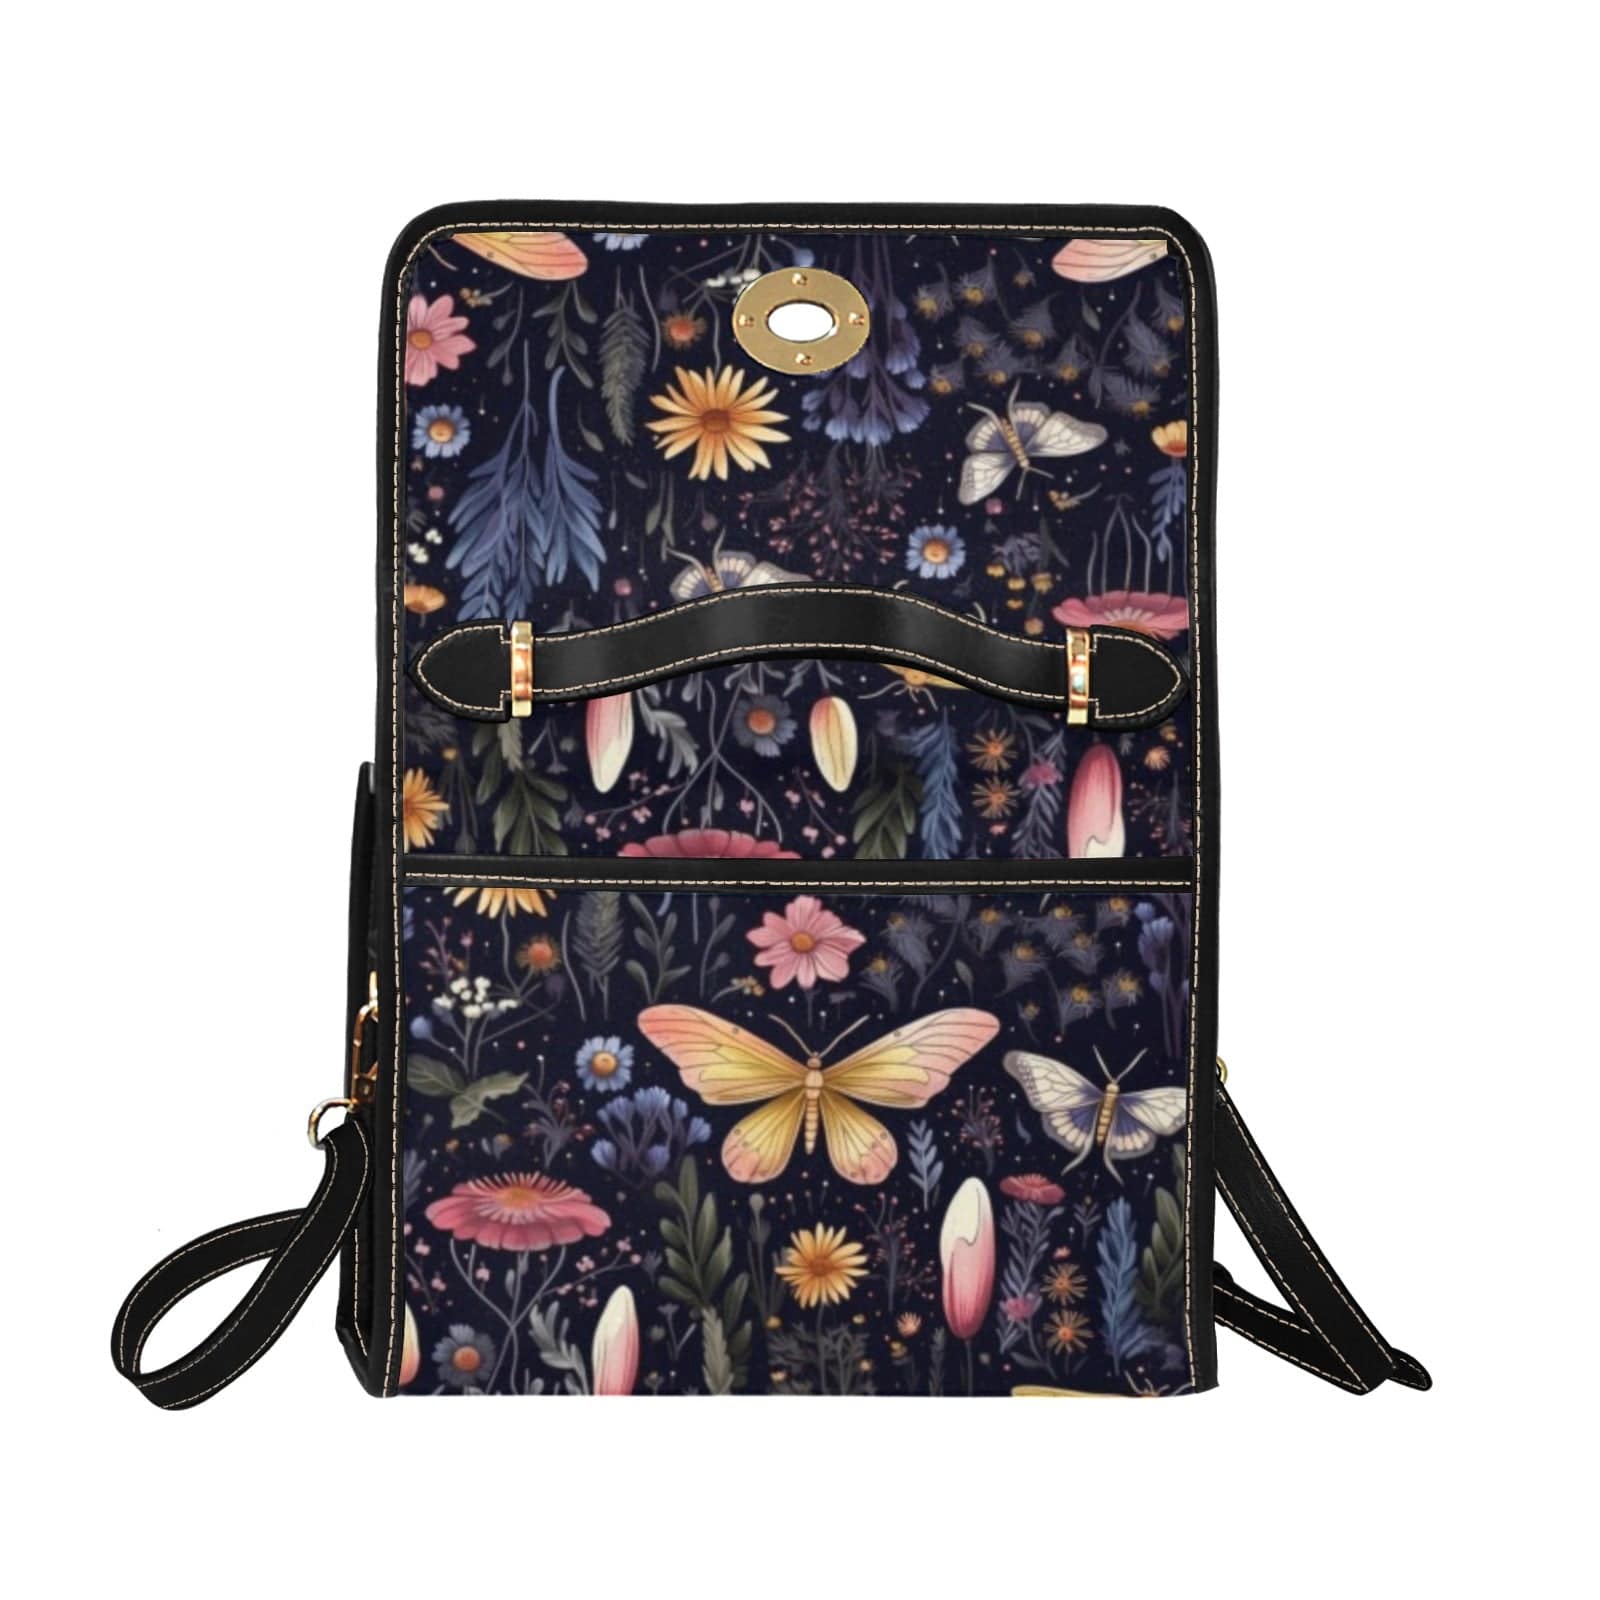 back view ofthe Stylish boxy satchel handbag featuring vintage style cottagecore midnight garden print featuring beautiful moths and dark florals